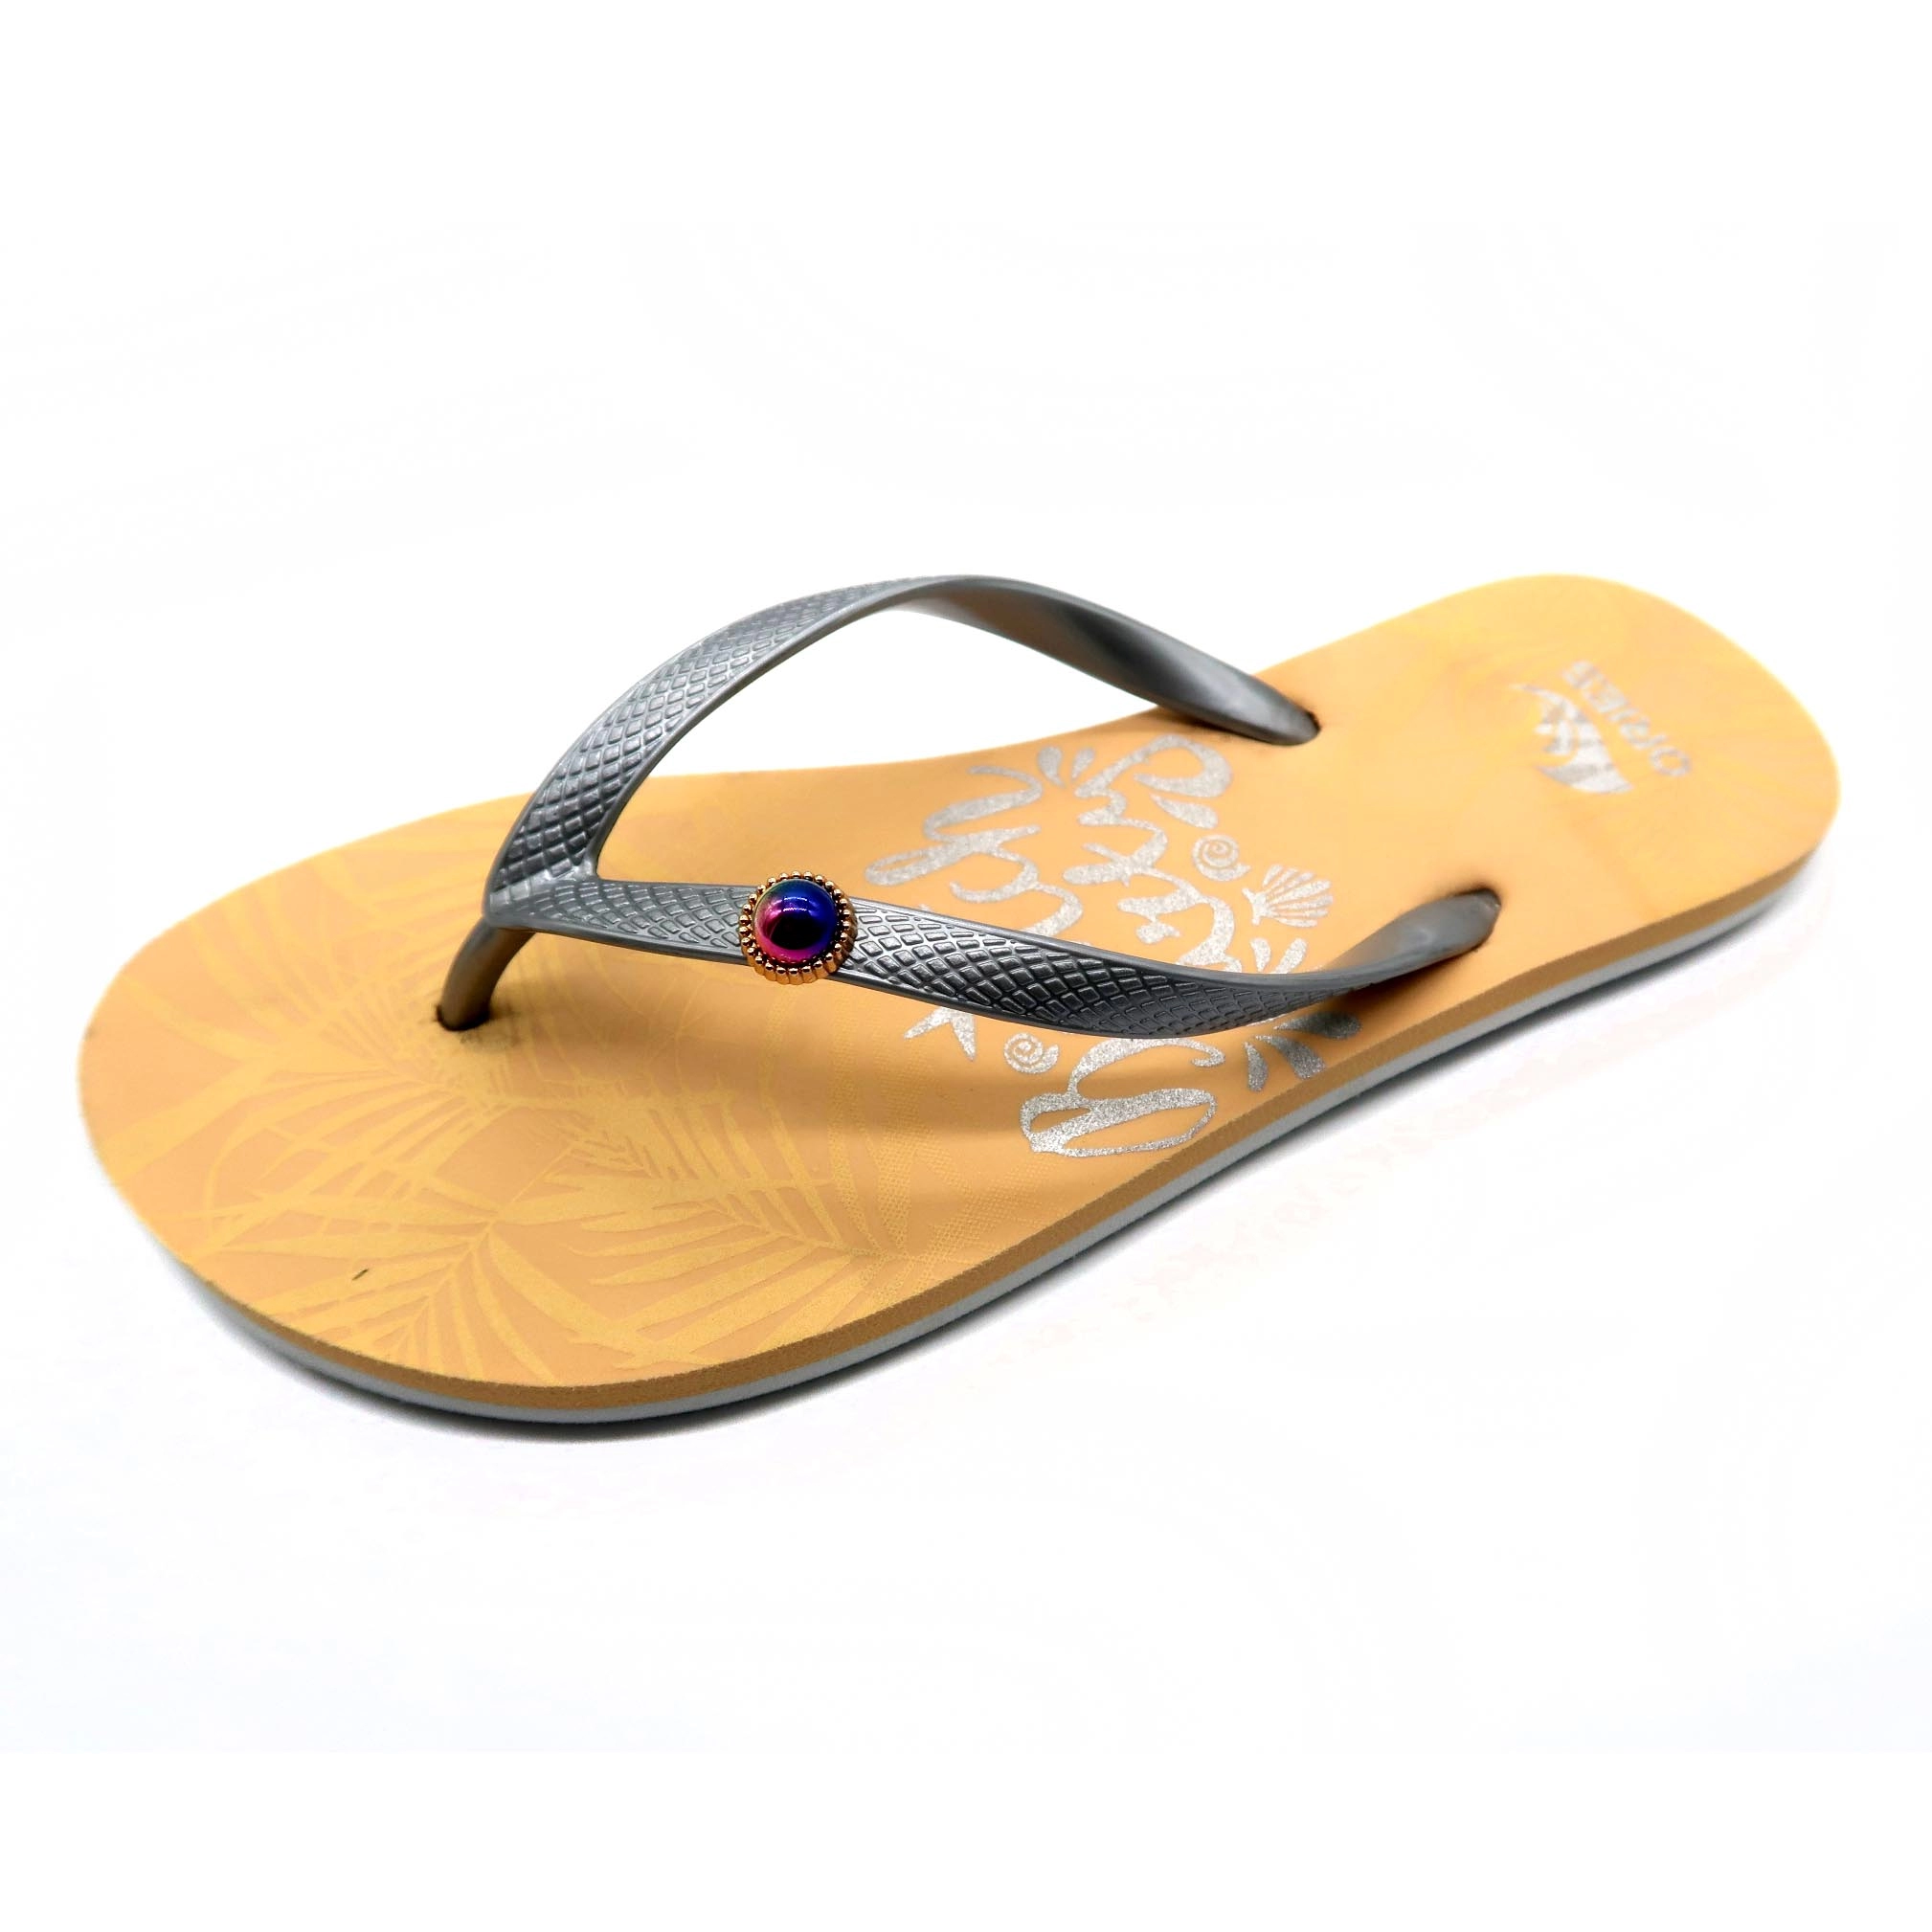 Shinny effect on strap with jewel daily wearing lady flip flops slippers